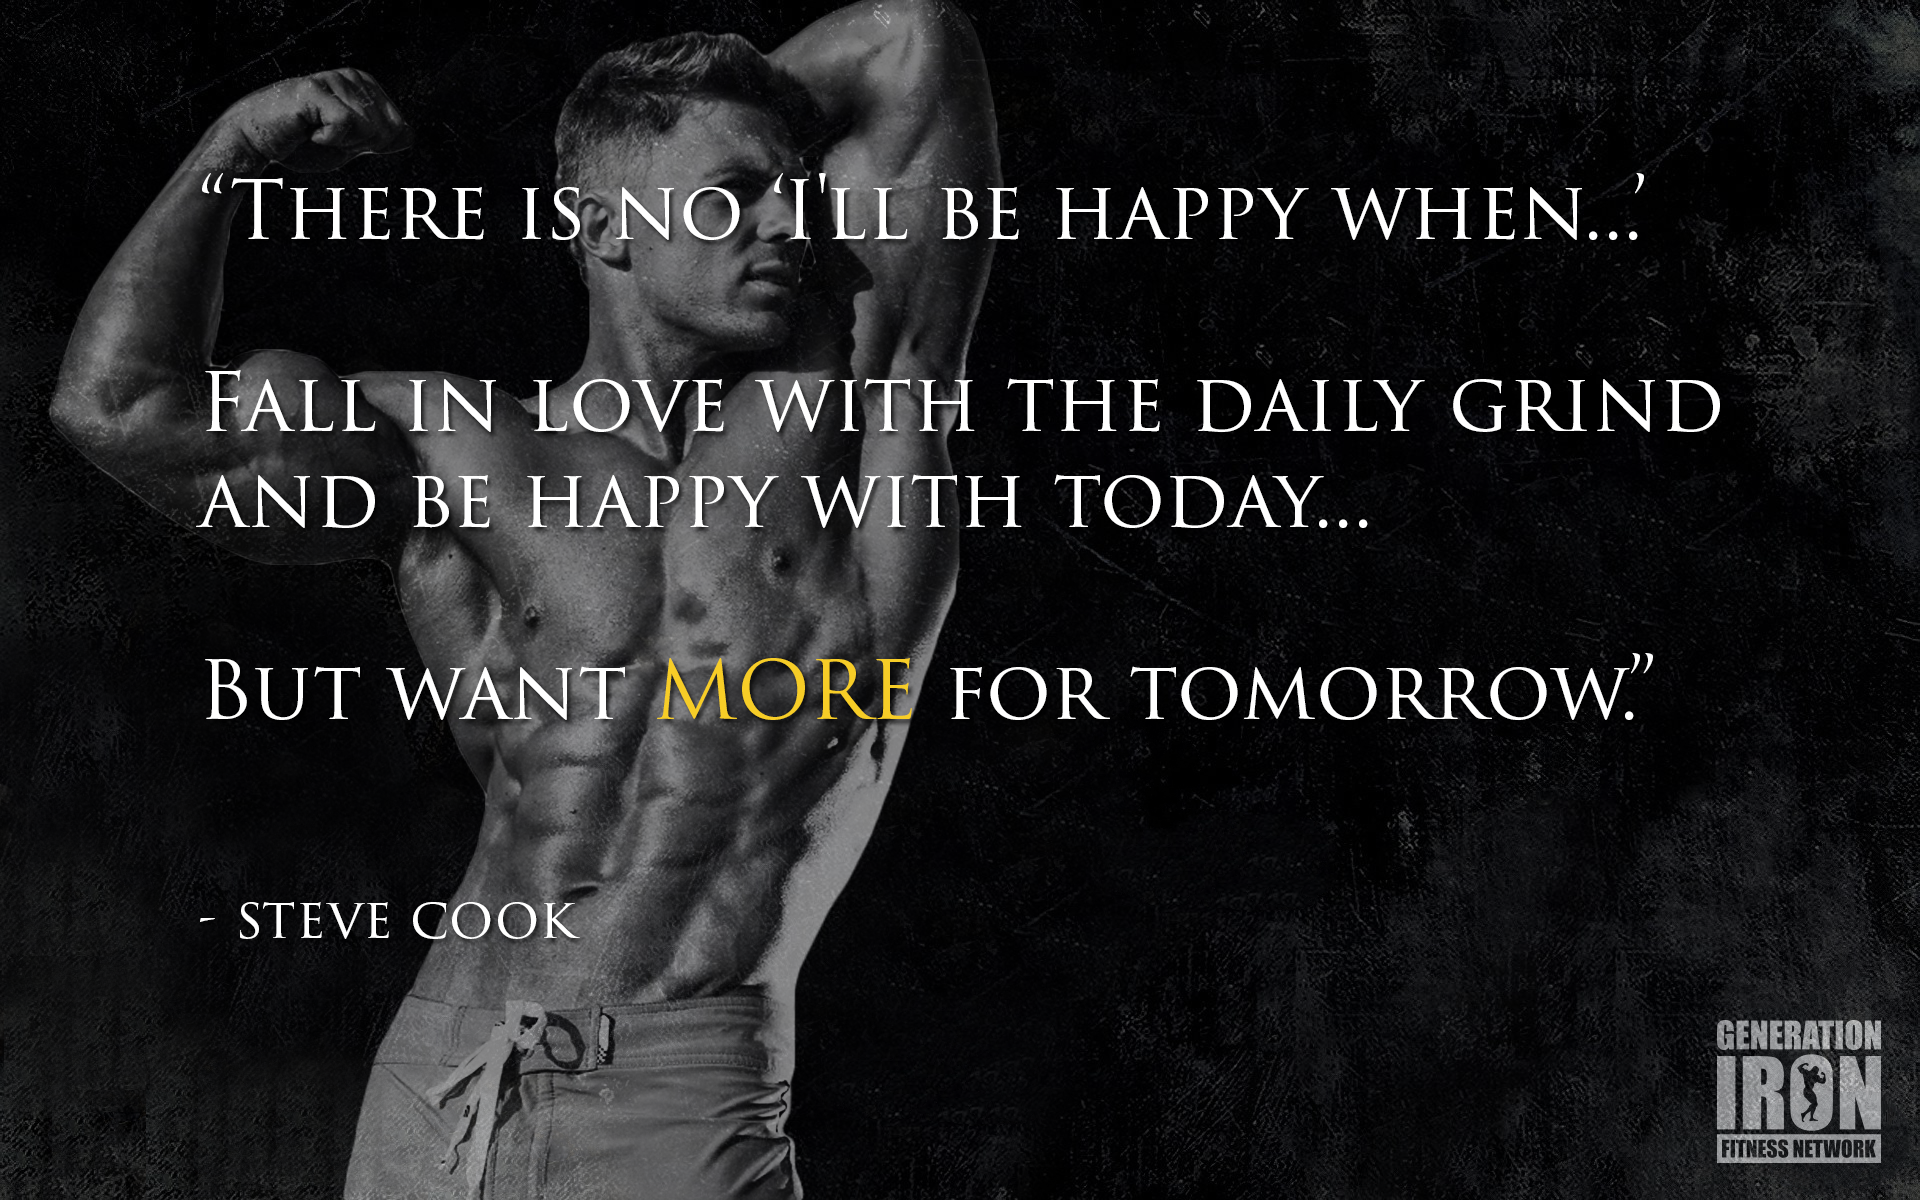 Generation Iron Steve Cook Quote